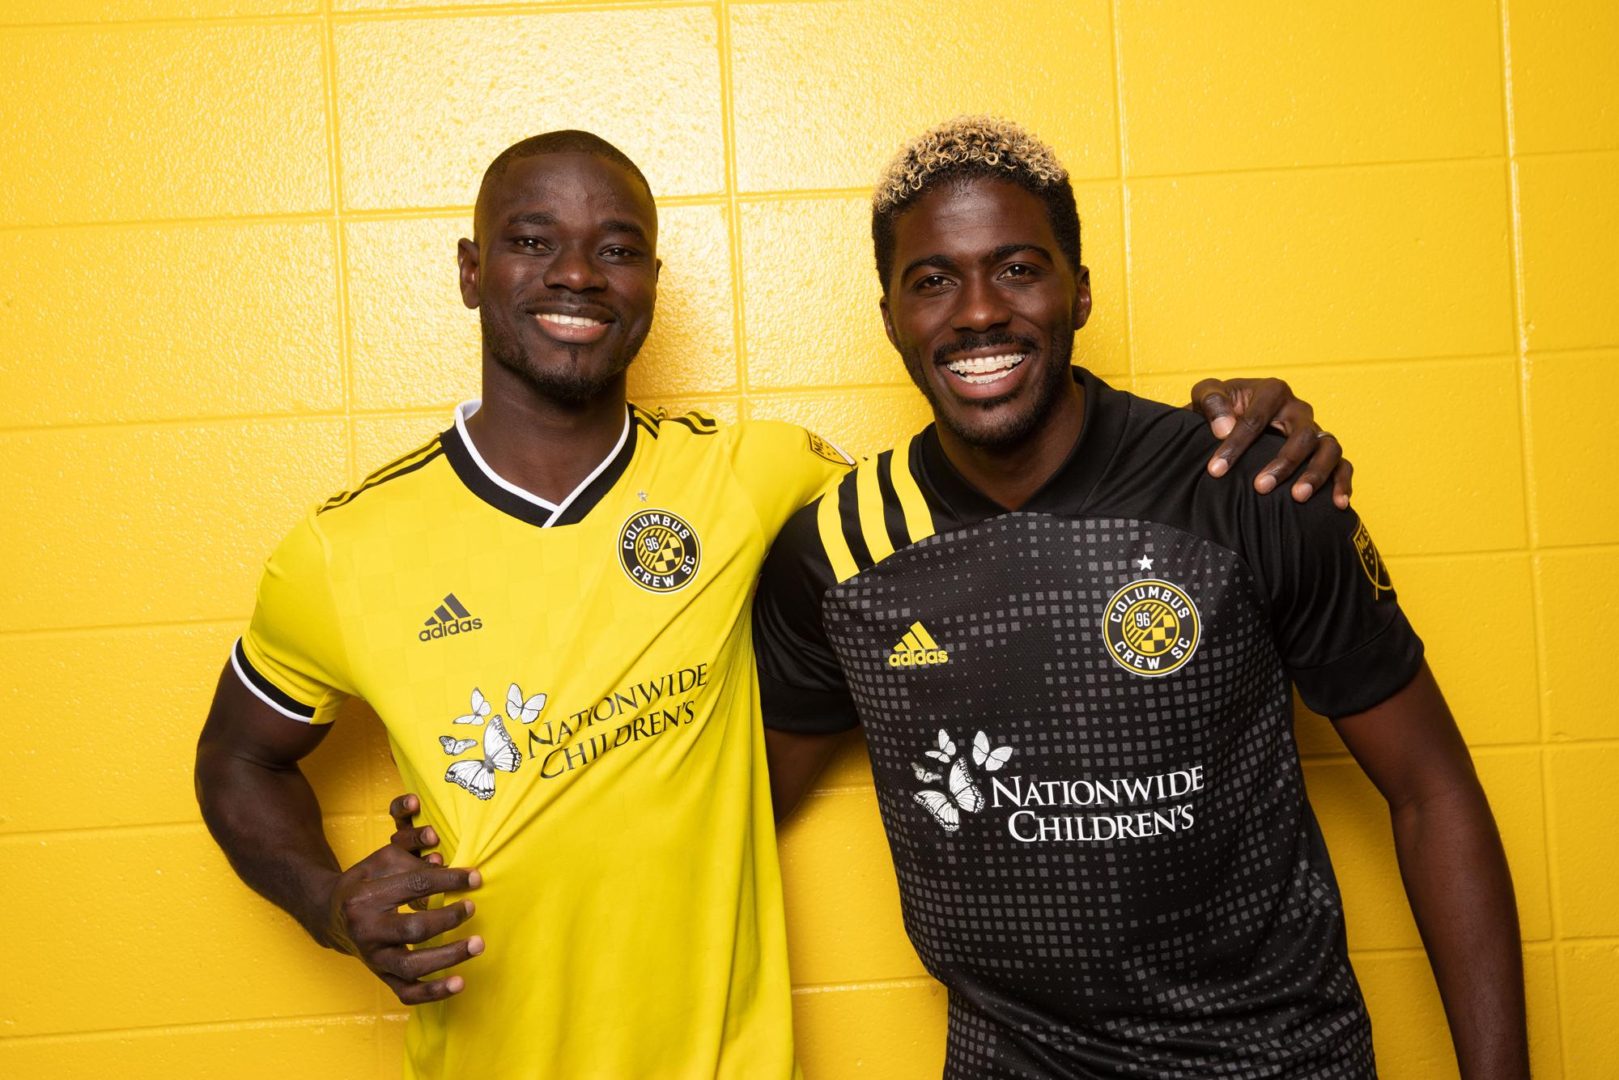 Columbus Crew Tryouts & Club Guide History, Stadium, Players, and More!